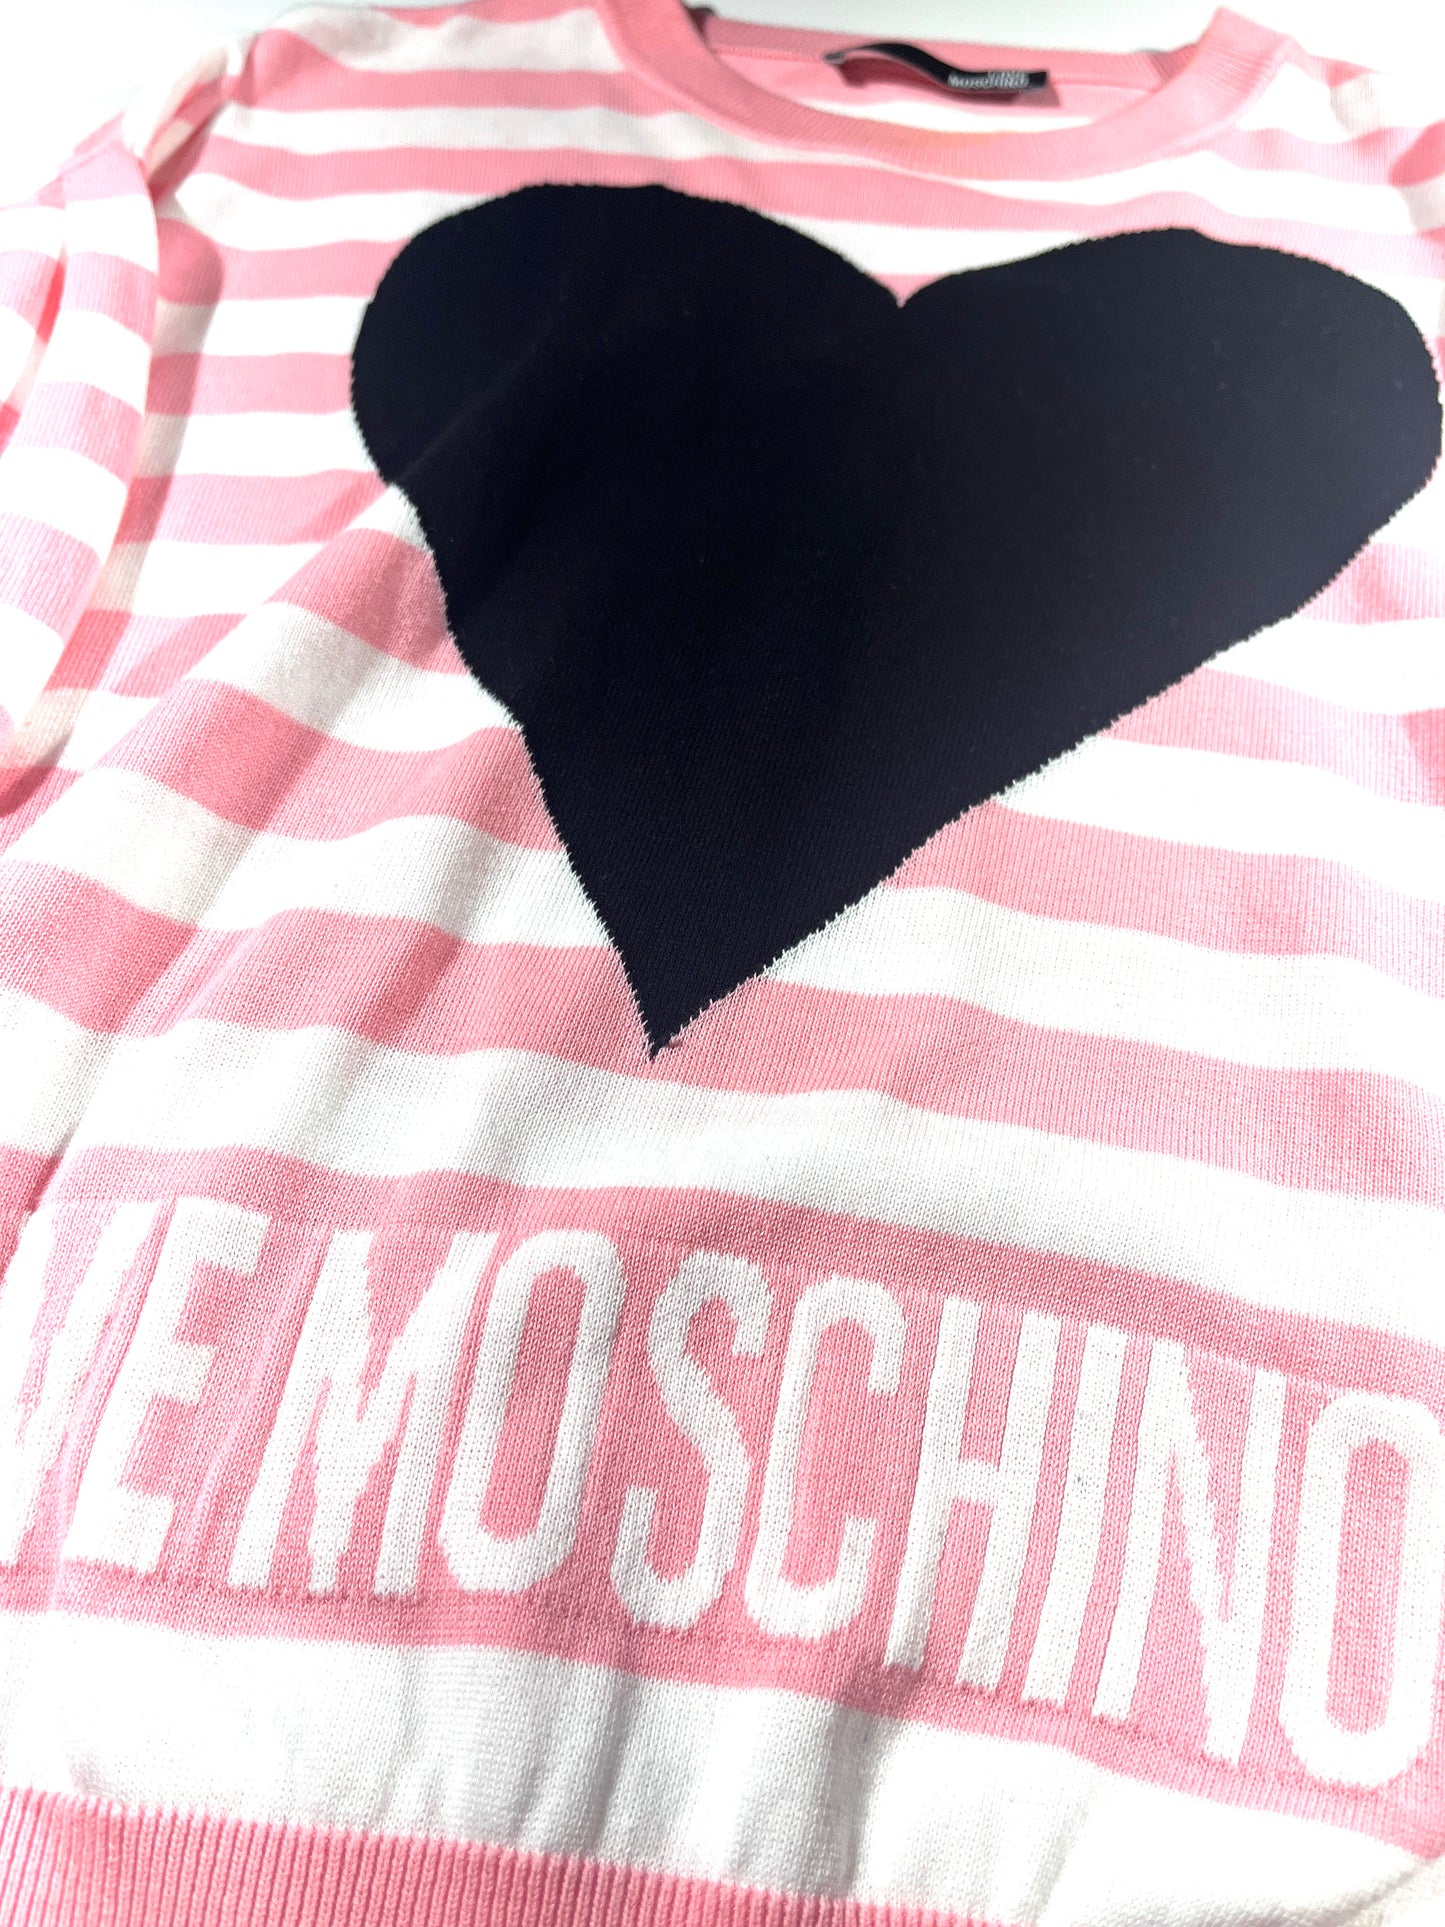 Vintage Love Moschino Top